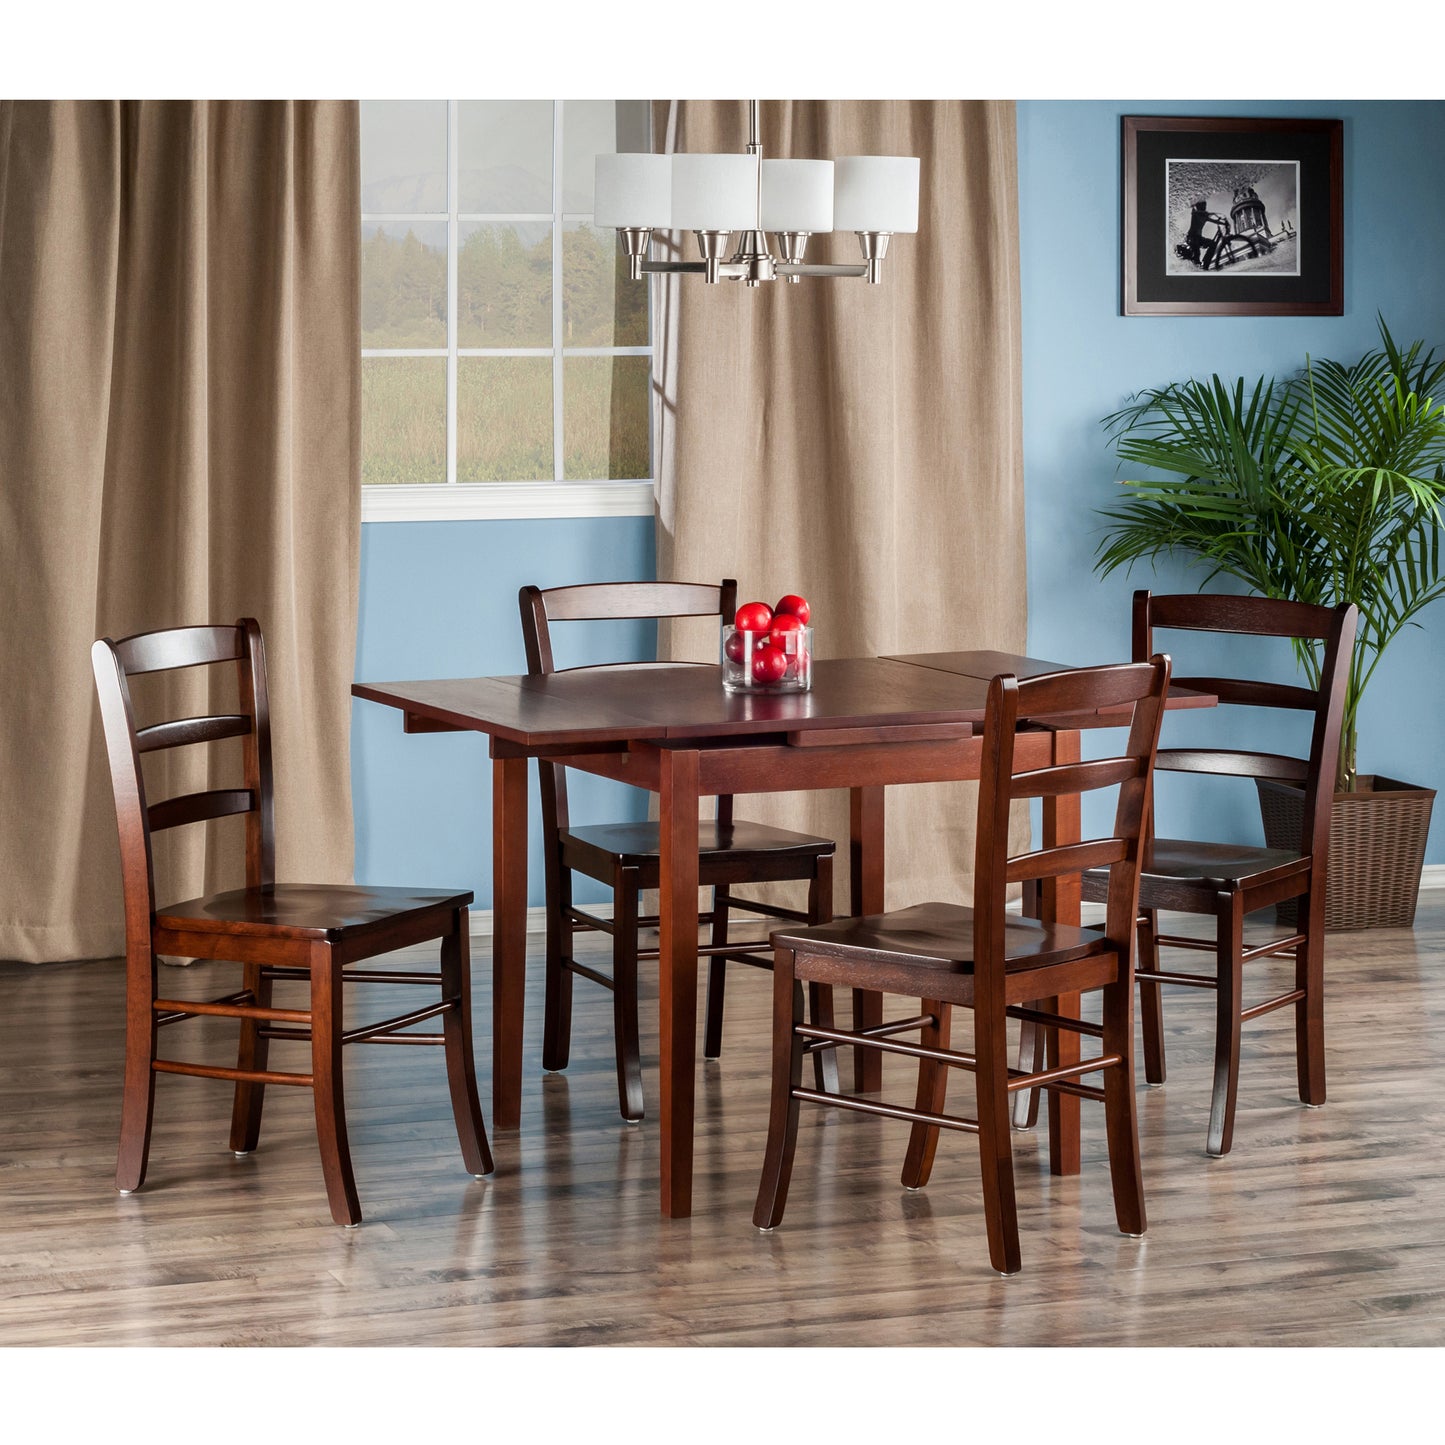 Pulman 5-Pc Extendable Table with Ladder-back Chairs, Walnut